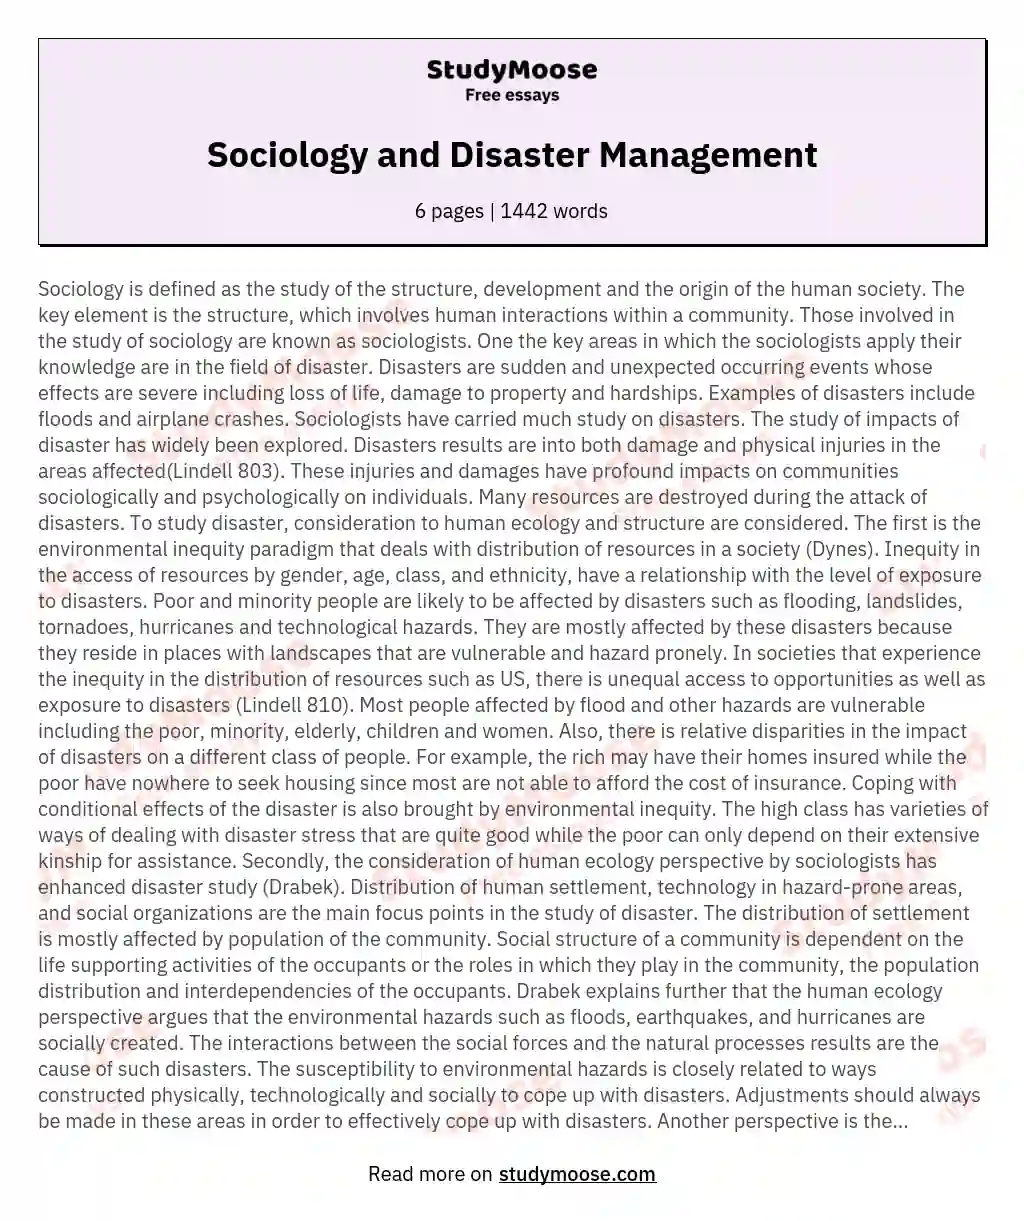 Sociology and Disaster Management essay